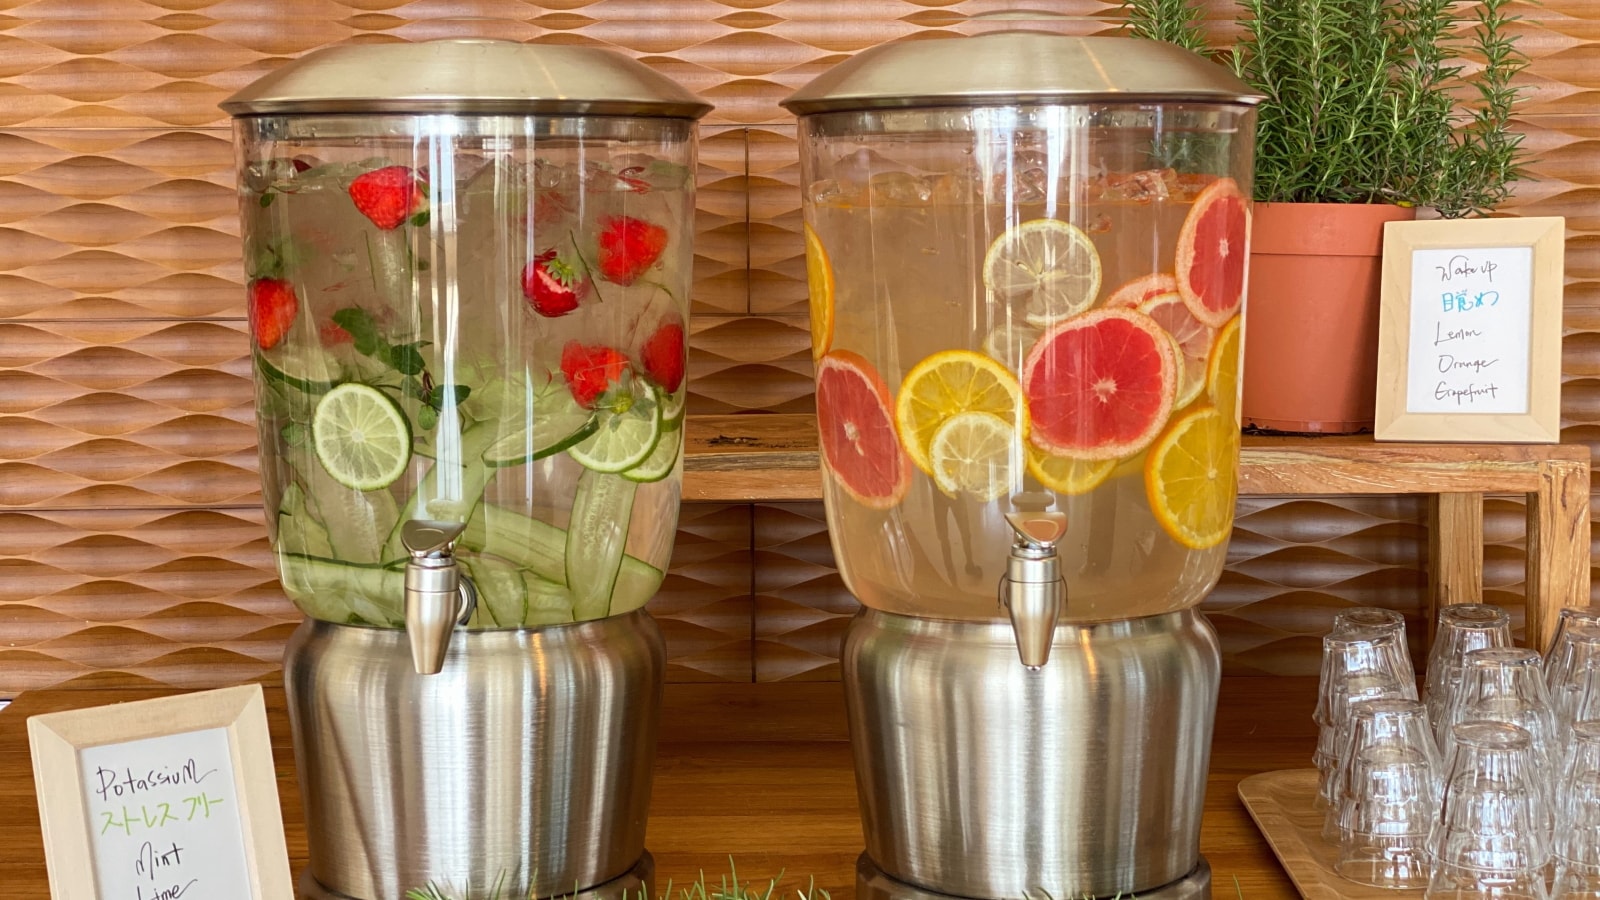 [Detox Water] Available in the lobby on the 2nd floor